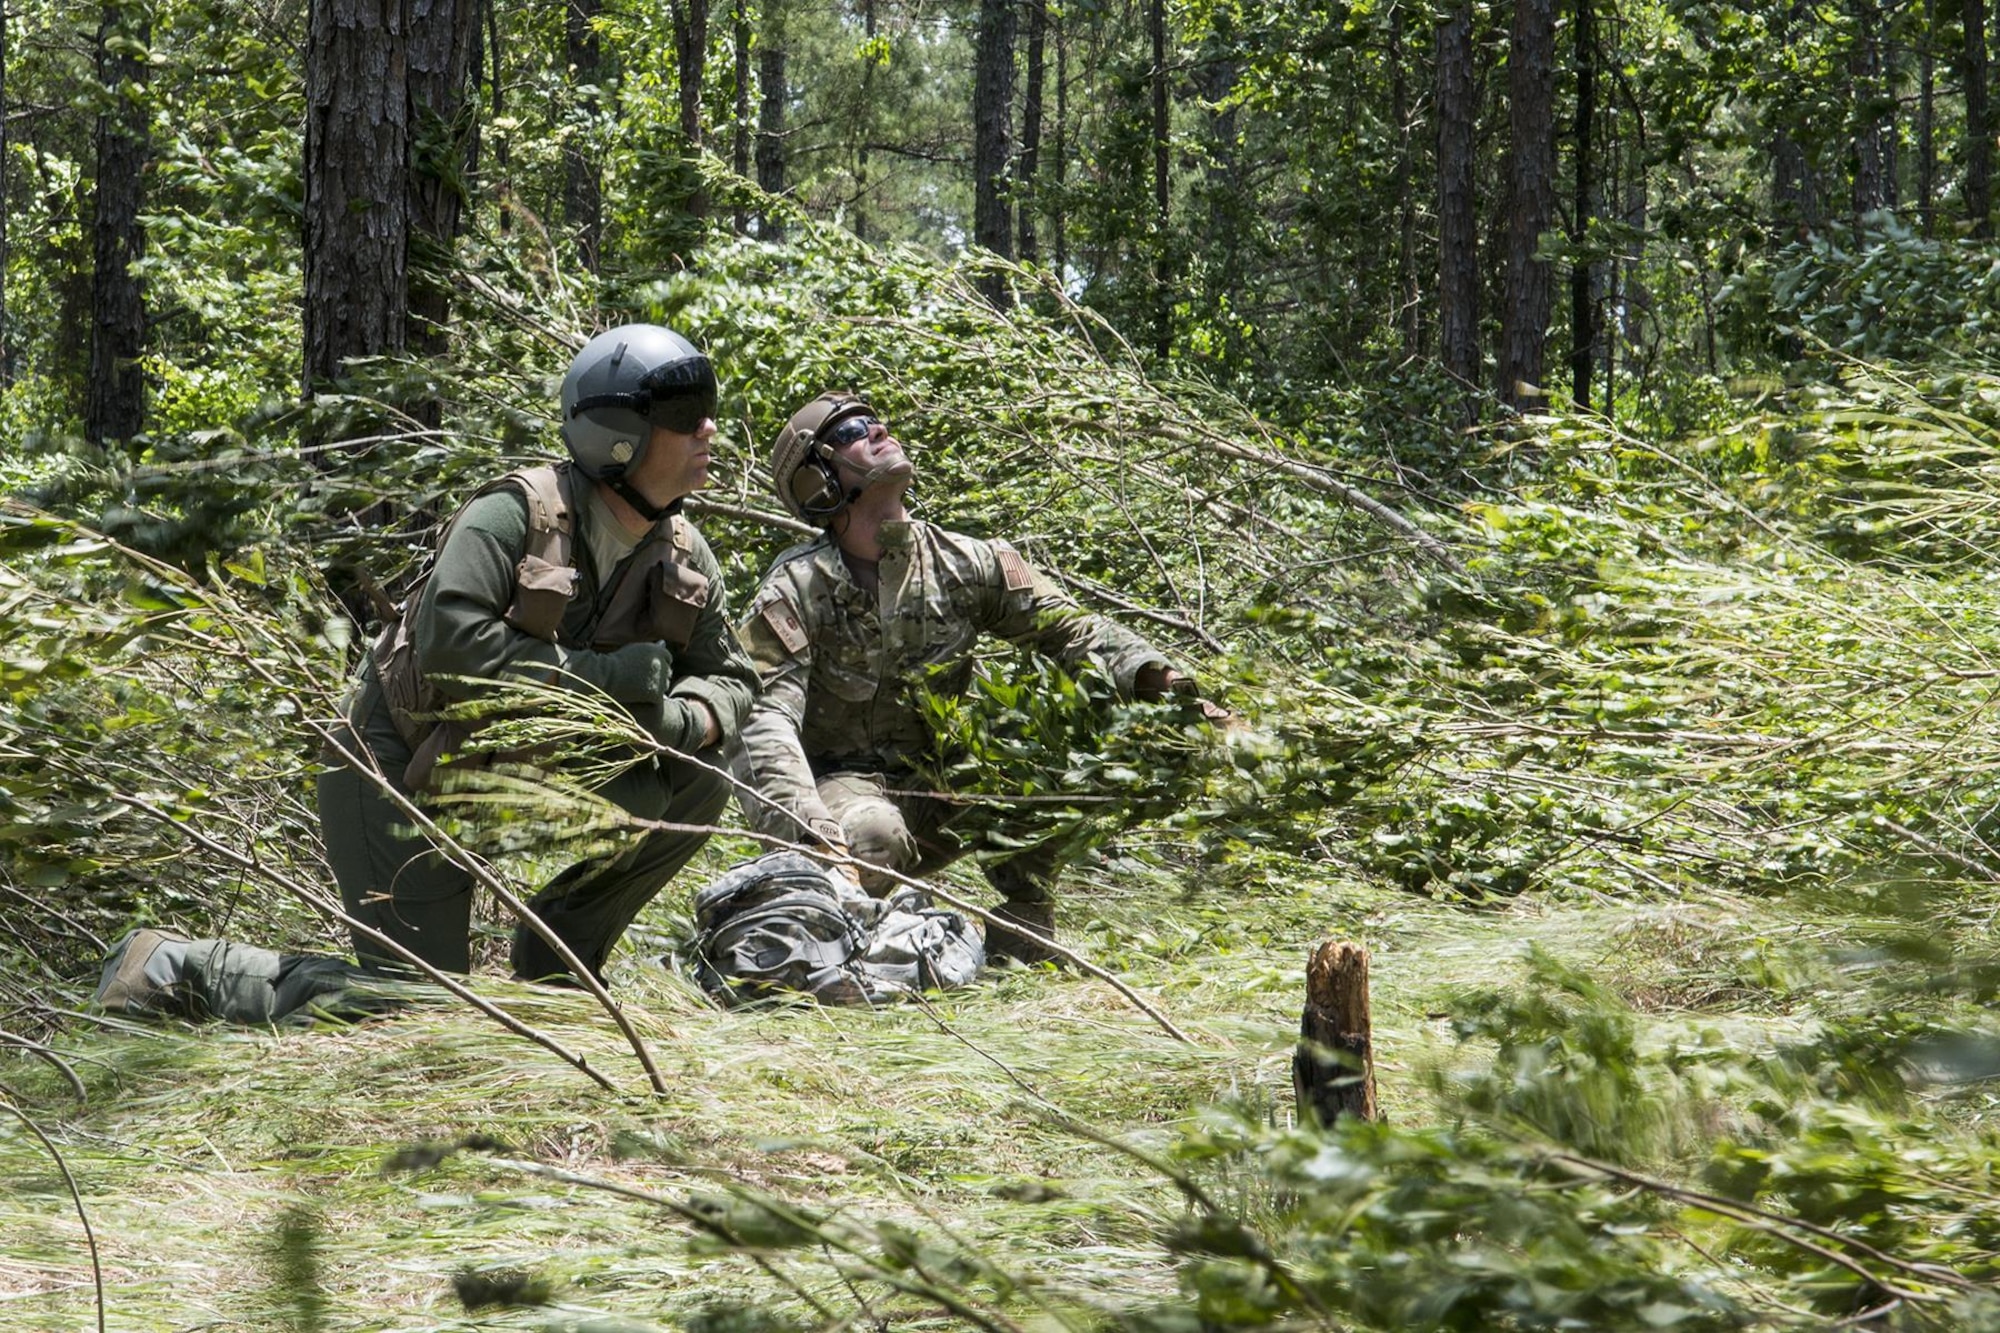 U.S. Air Force Lt. Col. Christopher Anderson, 307th Operations Support Squadron commander,  and Staff Sgt. Matthew Mete, 2nd Operations Support Squadron SERE instructor, brace themselves against the winds of a hovering helicopter during SERE training on May 14, 2016, Claiborne Gunnery and Bombing Range, La. SERE, which stands for Survival, Evasion, Resistance and Escape, is required training for all aircrew members and provides the knowledge and tools necessary to survive on their own in any environment and under any condition should they have to abandon their aircraft. (U.S. Air Force photo by Master Sgt. Greg Steele/Released)